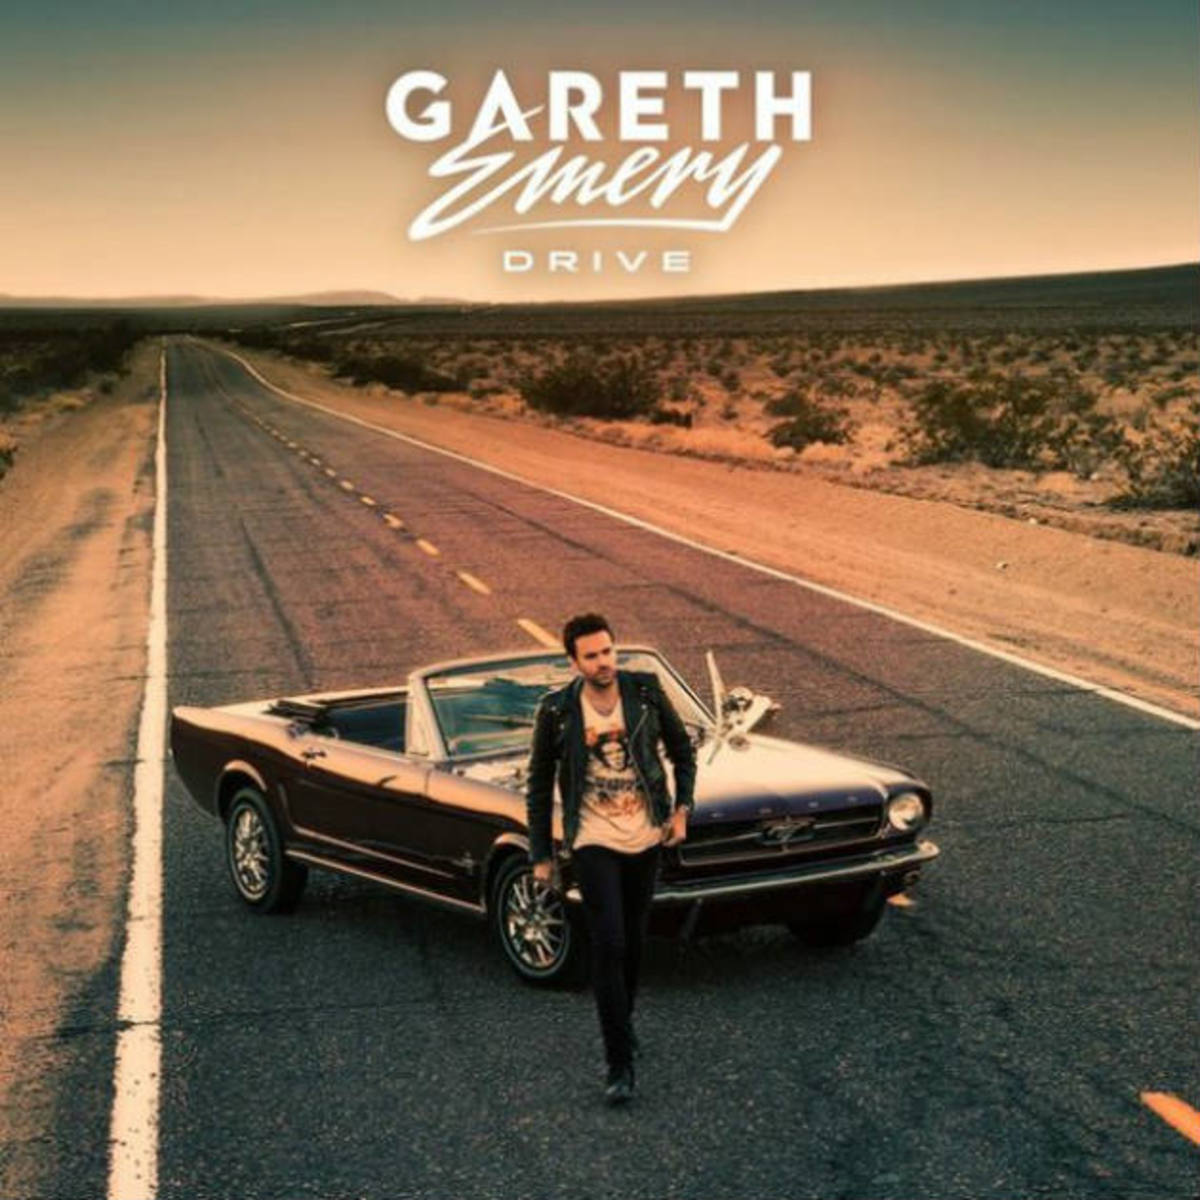 Album Review - Gareth Emery "Drive" Out on Garuda - New Electronic Music